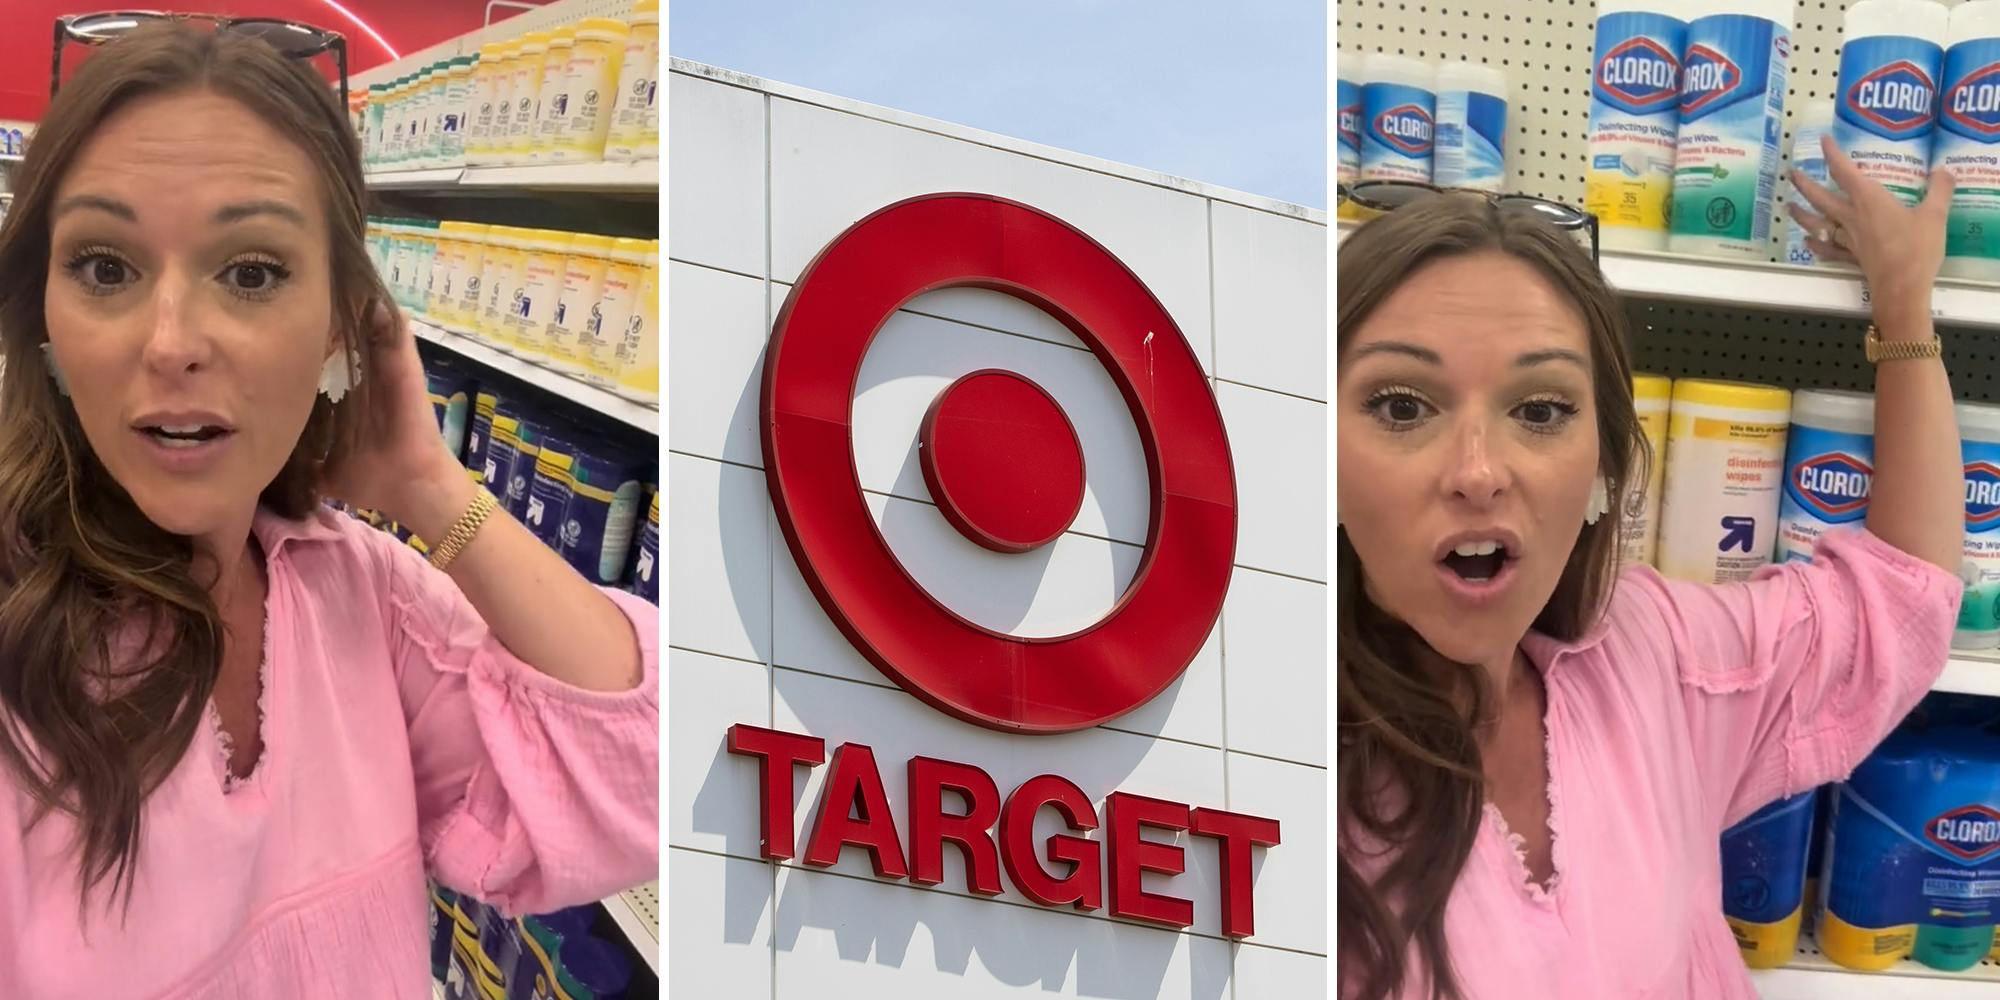 ‘I had to read it like 3 times’: Woman makes shocking discovery about Clorox wipes while in Target